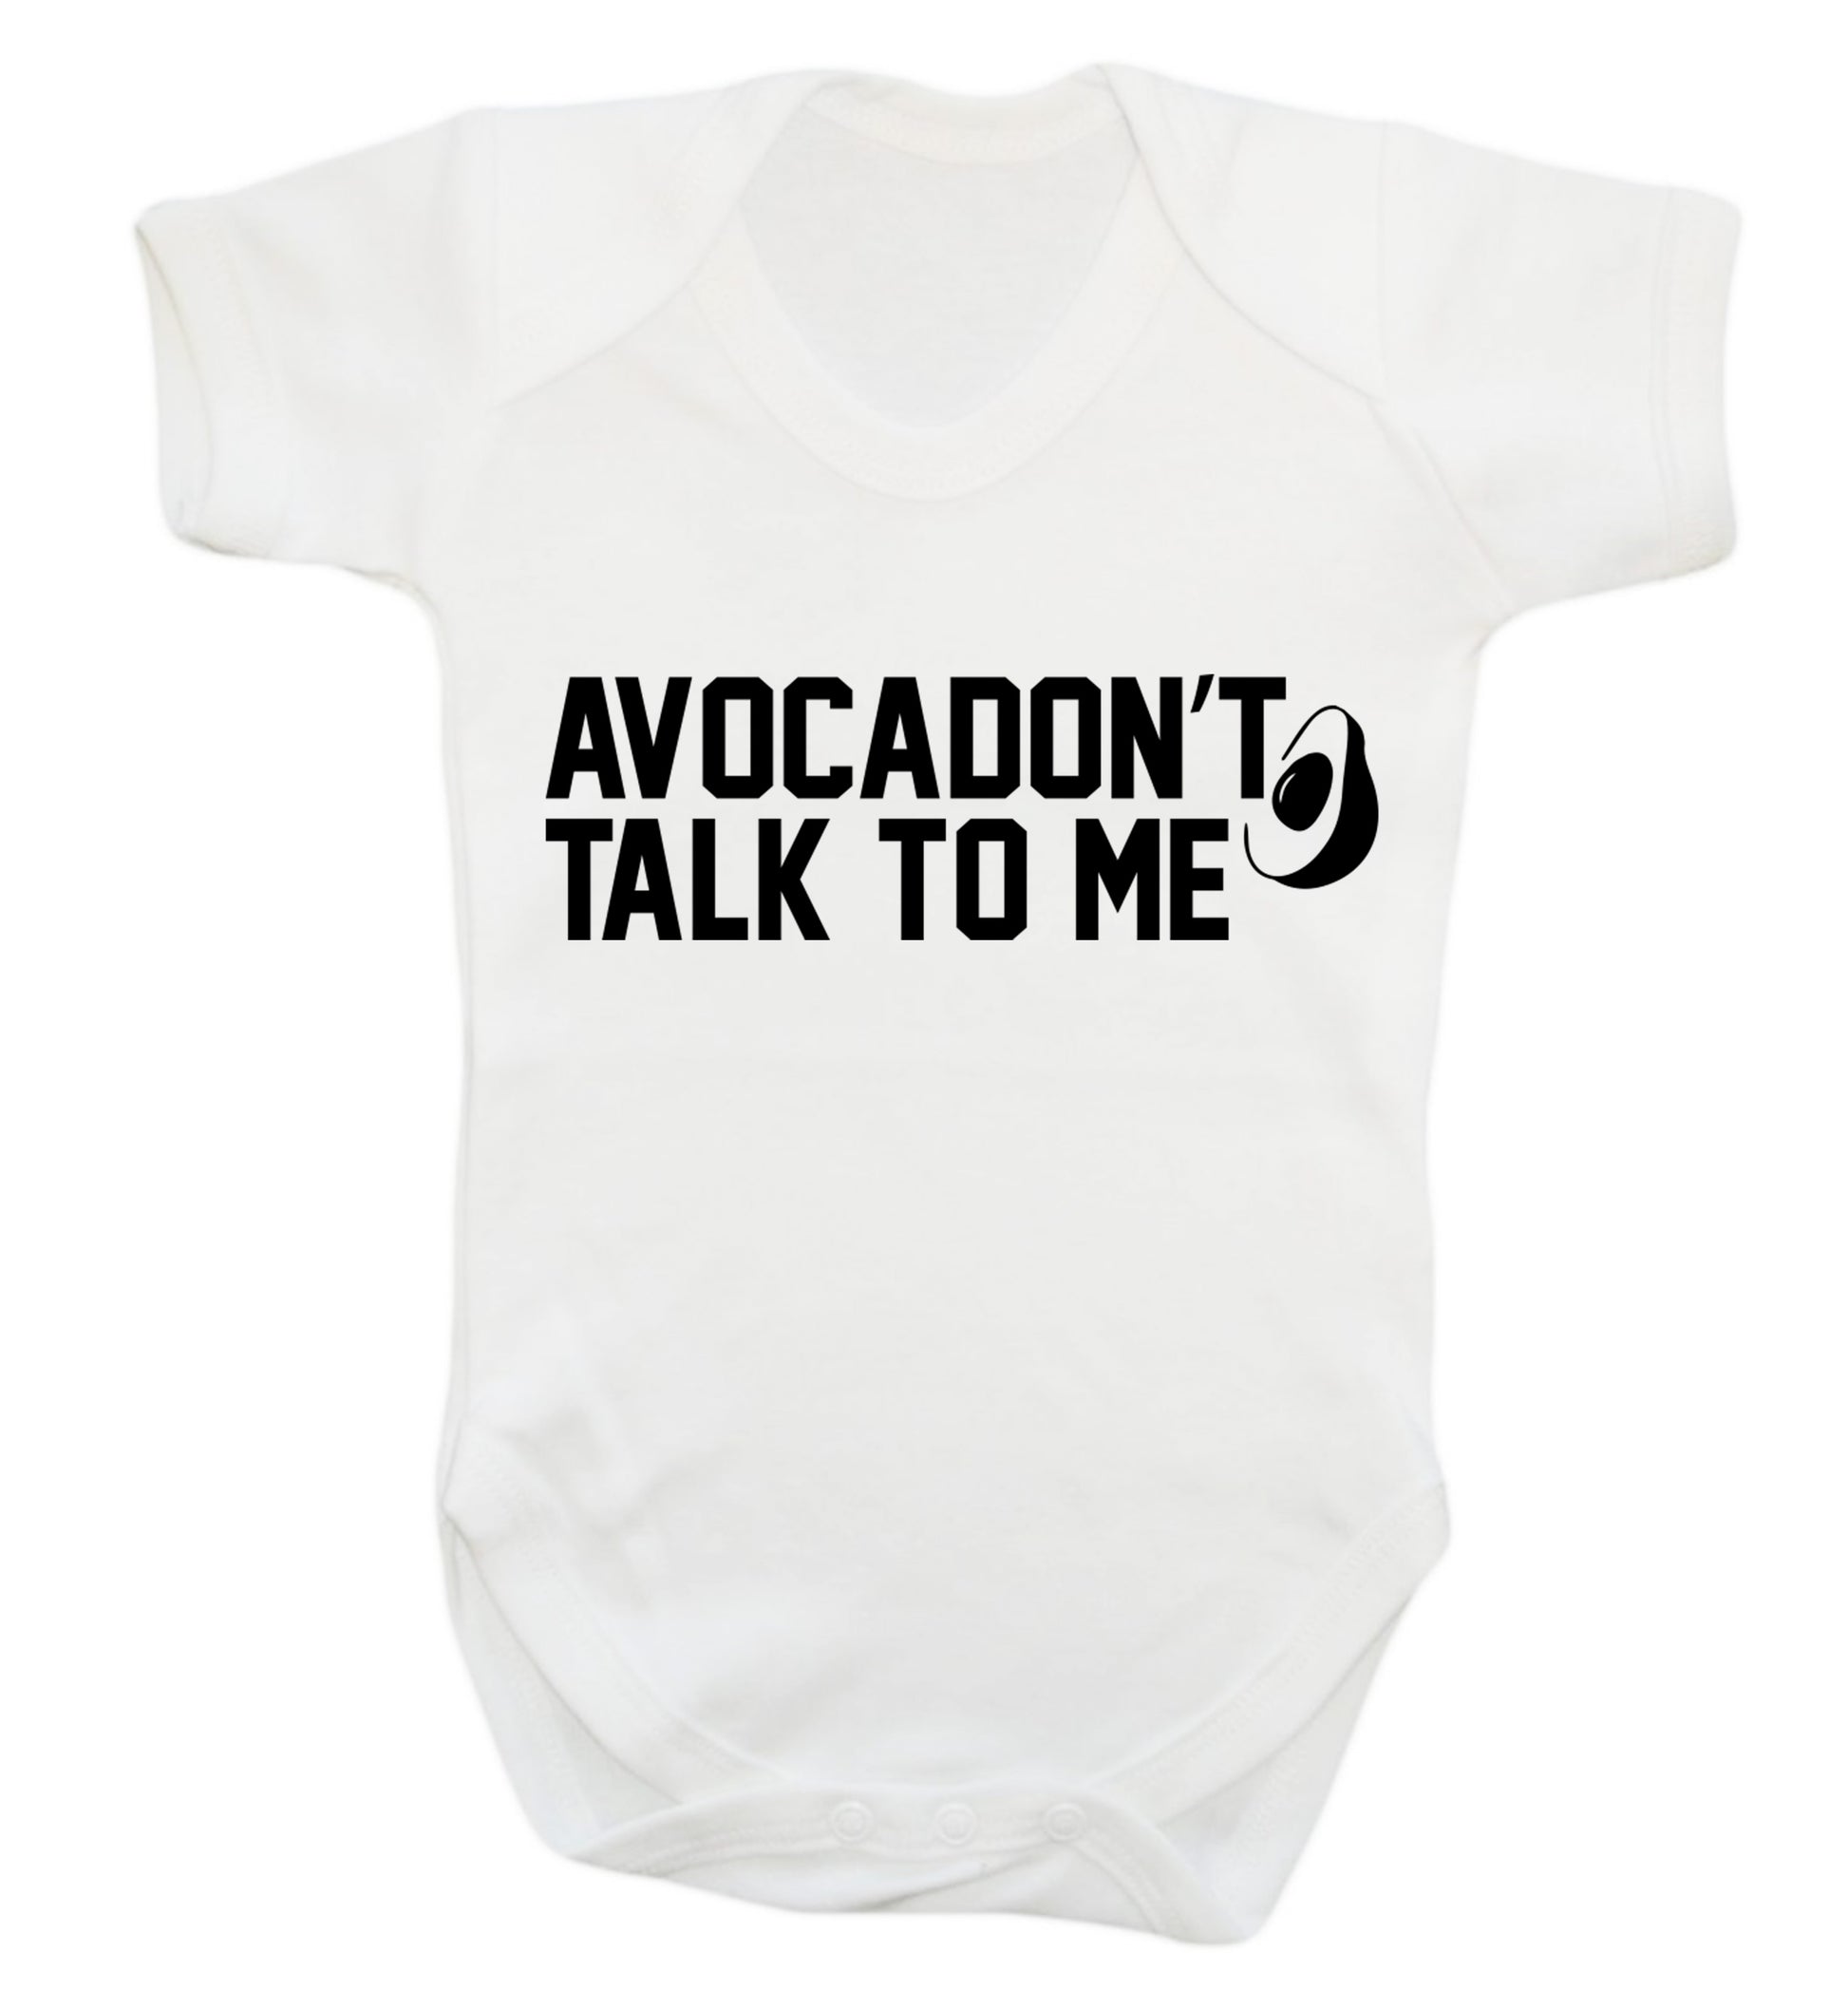 Avocadon't talk to me Baby Vest white 18-24 months